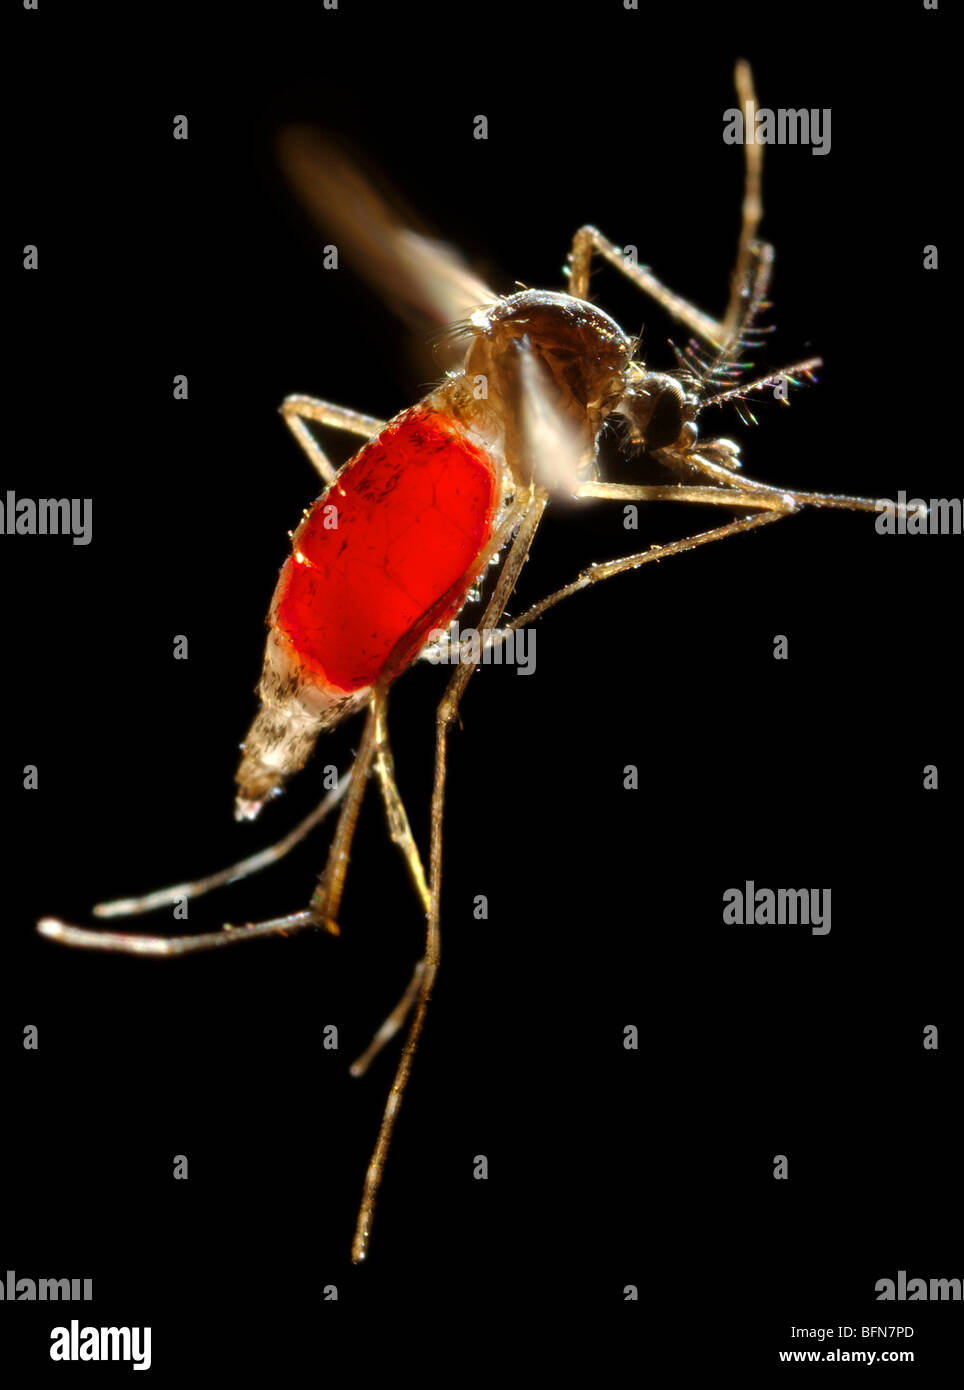 A female Aedes aegypti mosquito in flight with a newly-obtained blood meal visible through her  transparent abdomen Stock Photo